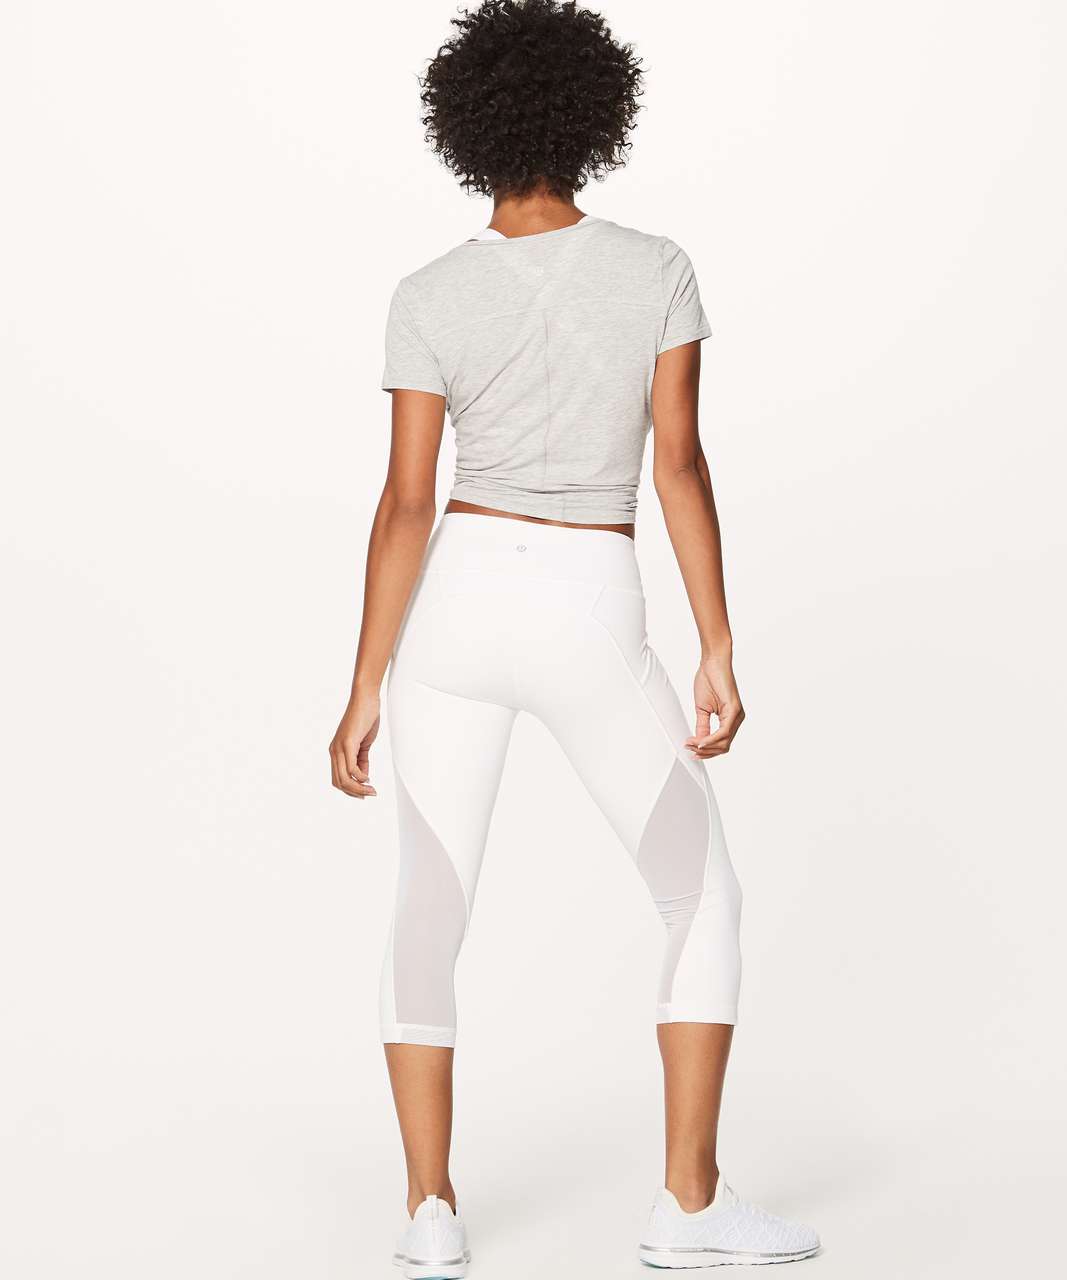 Lululemon Sweat Your Heart Out Crop (21") - White